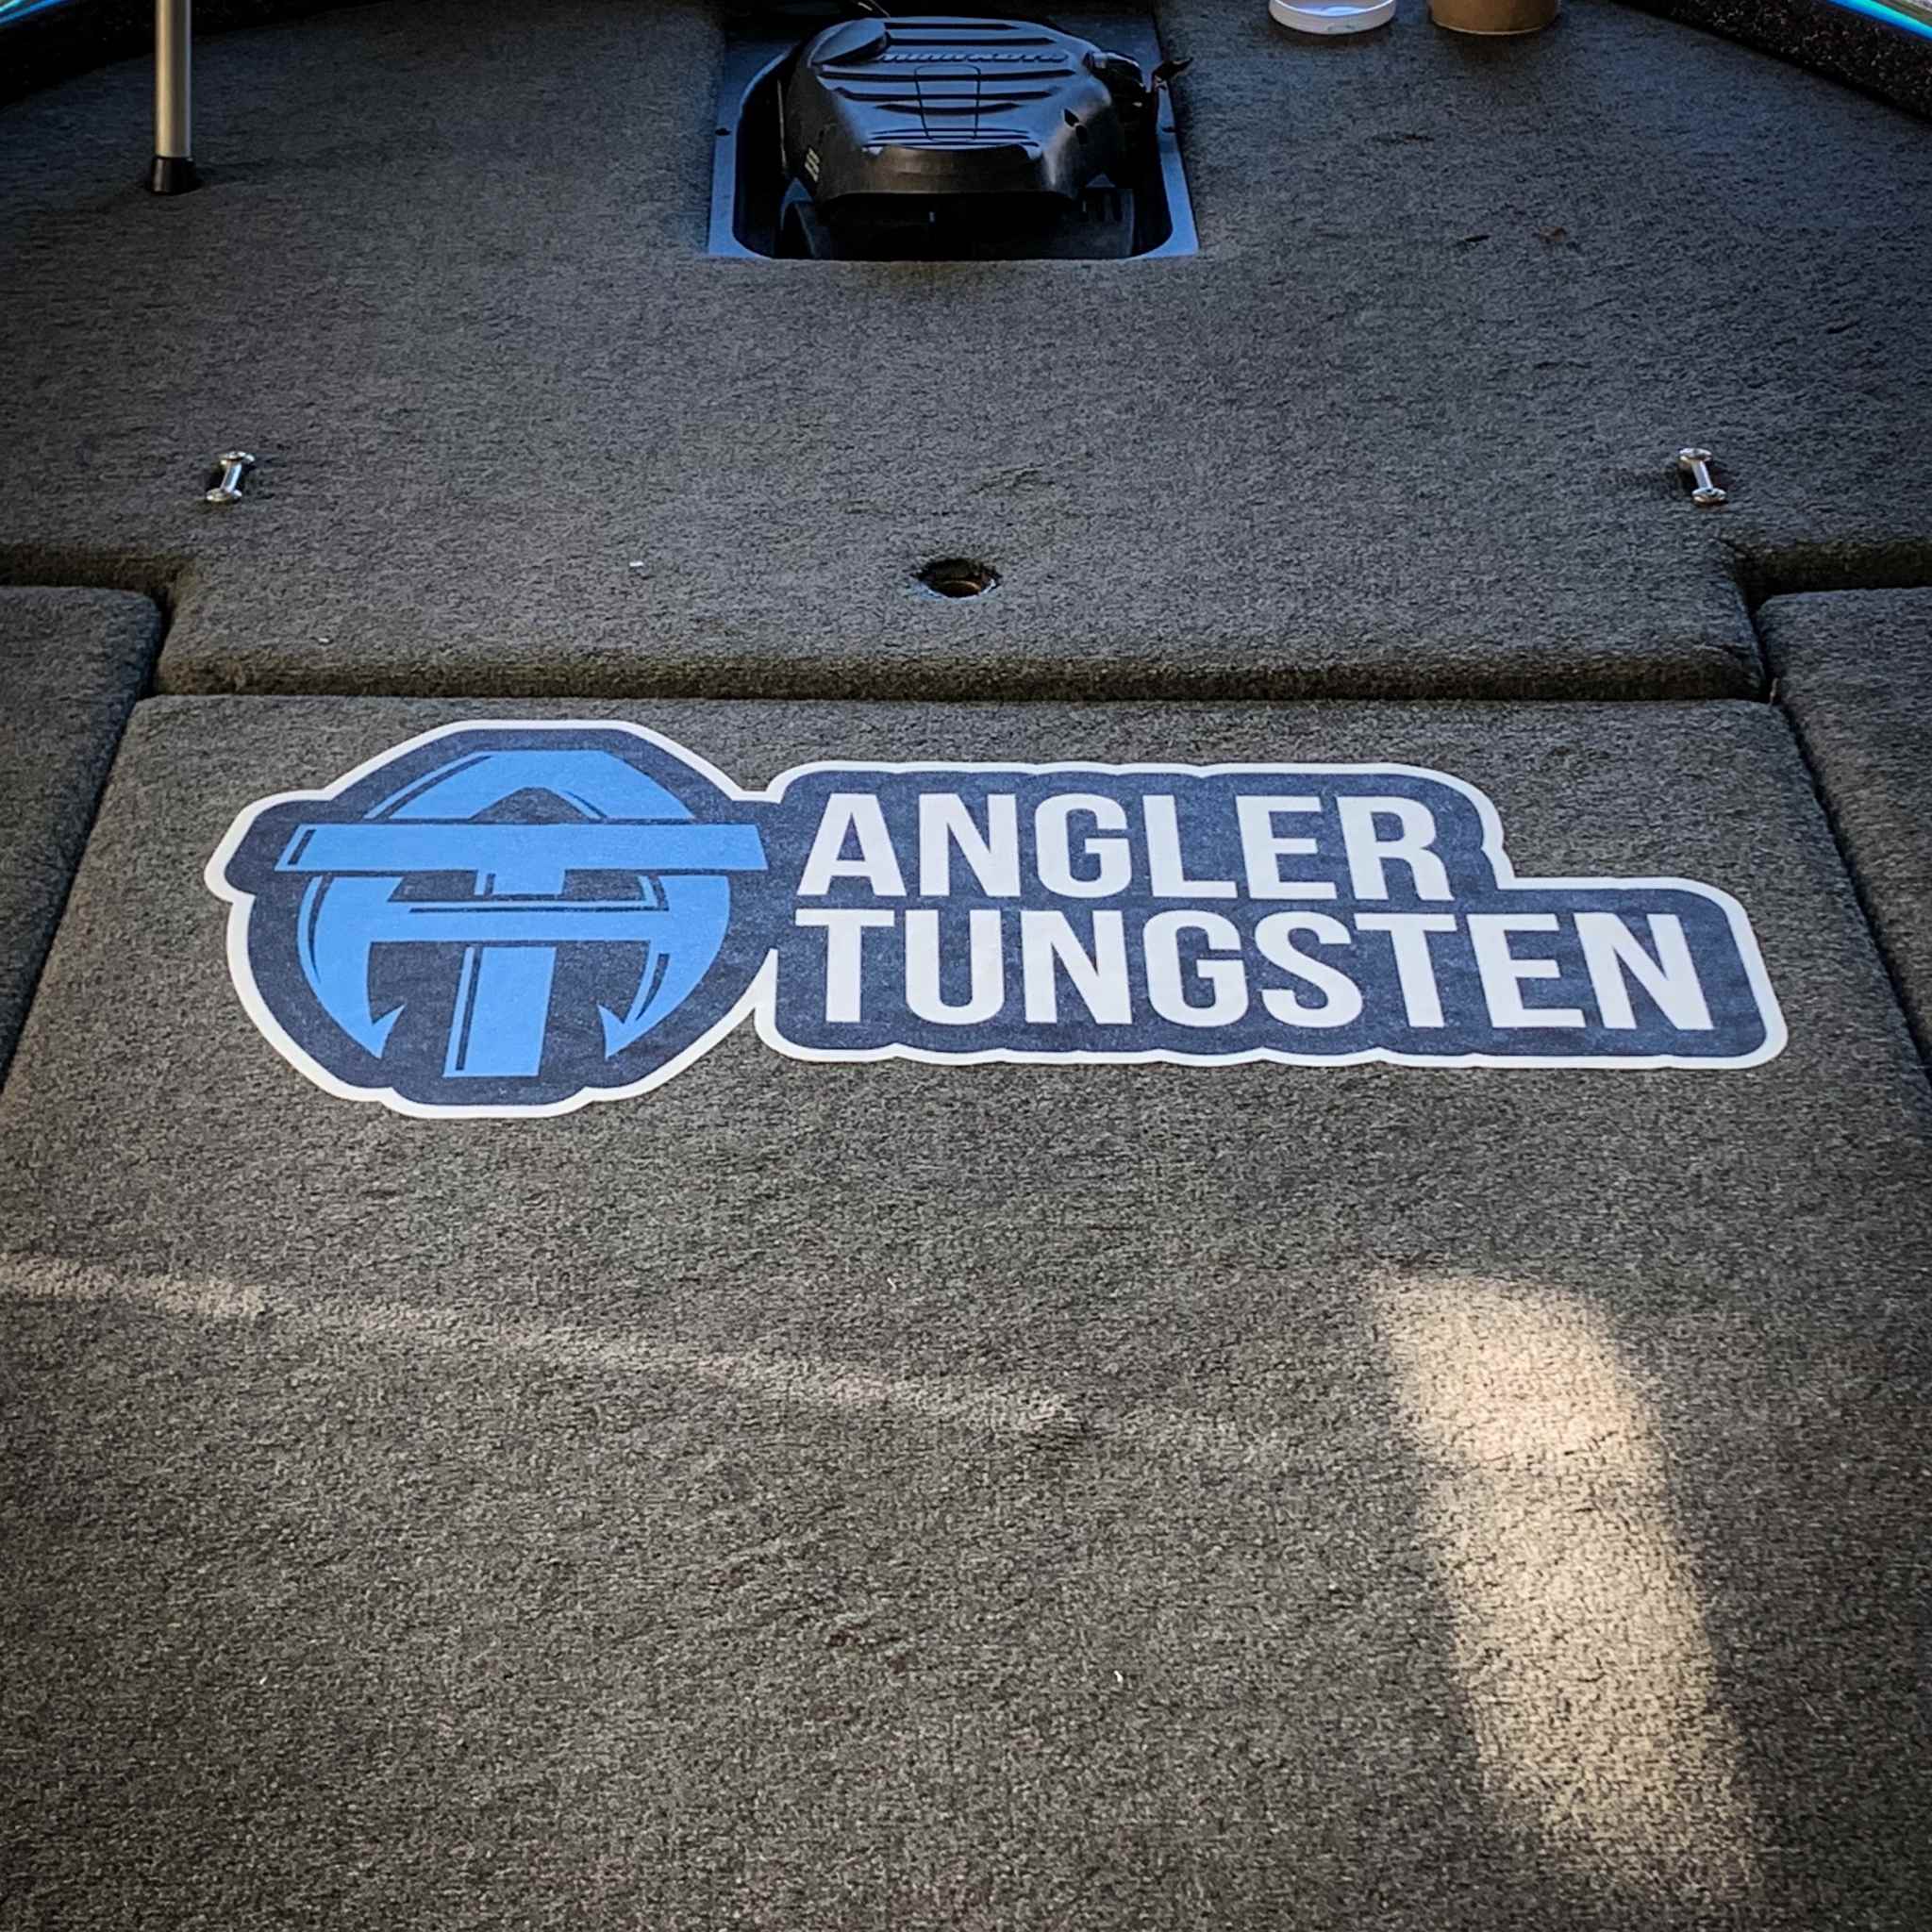 Large Angler Tungsten Carpet decals – Angler Tungsten Co